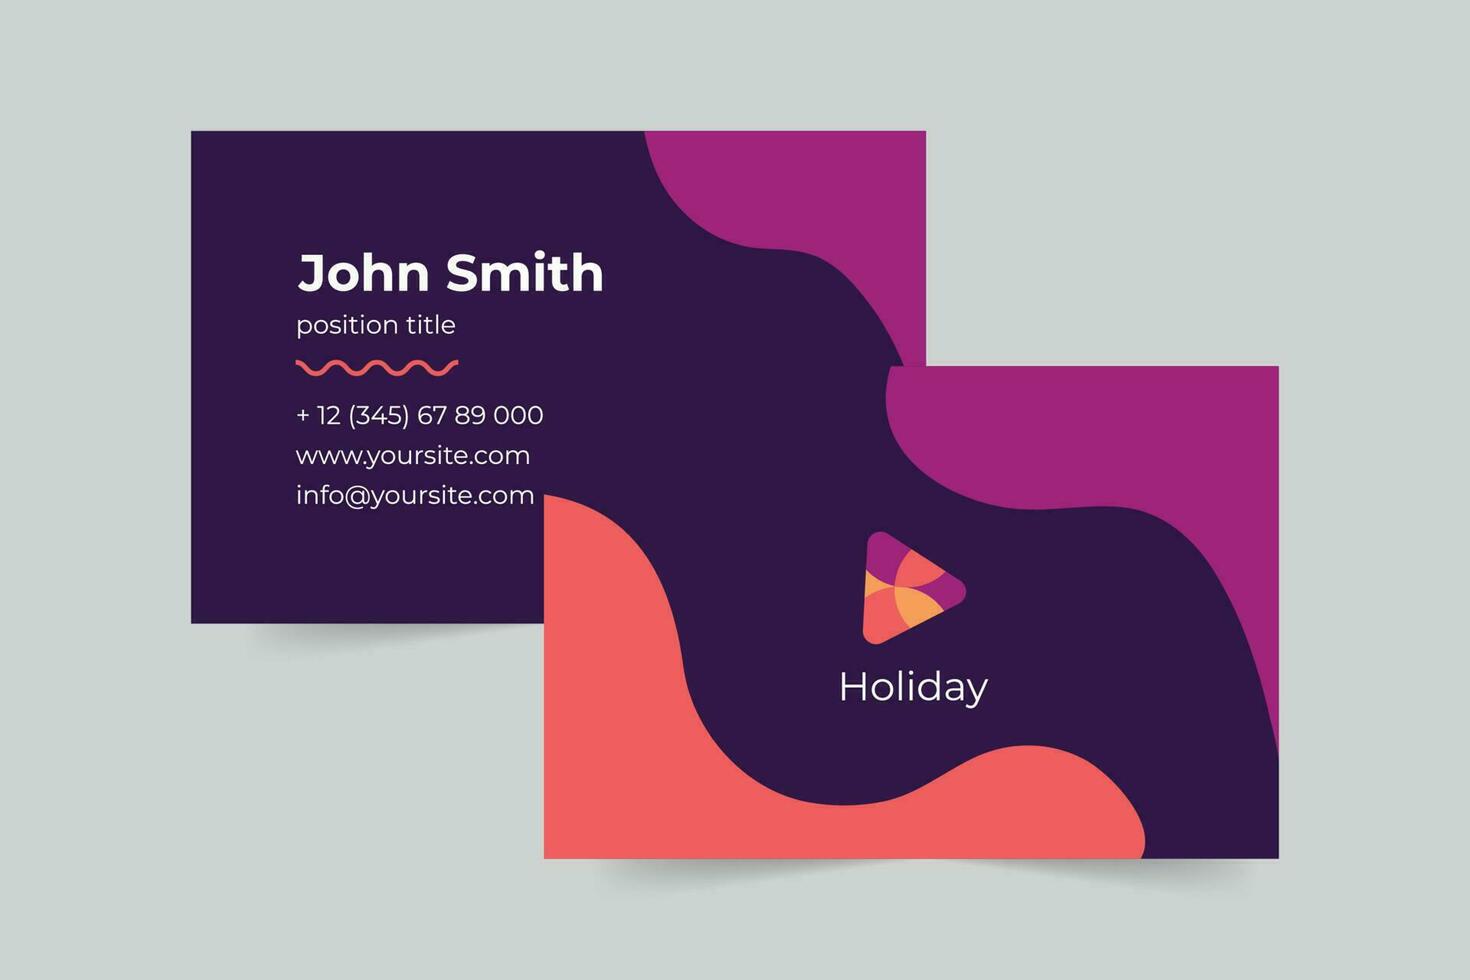 Event Management business card template. A clean, modern, and high-quality design business card vector design. Editable and customize template business card